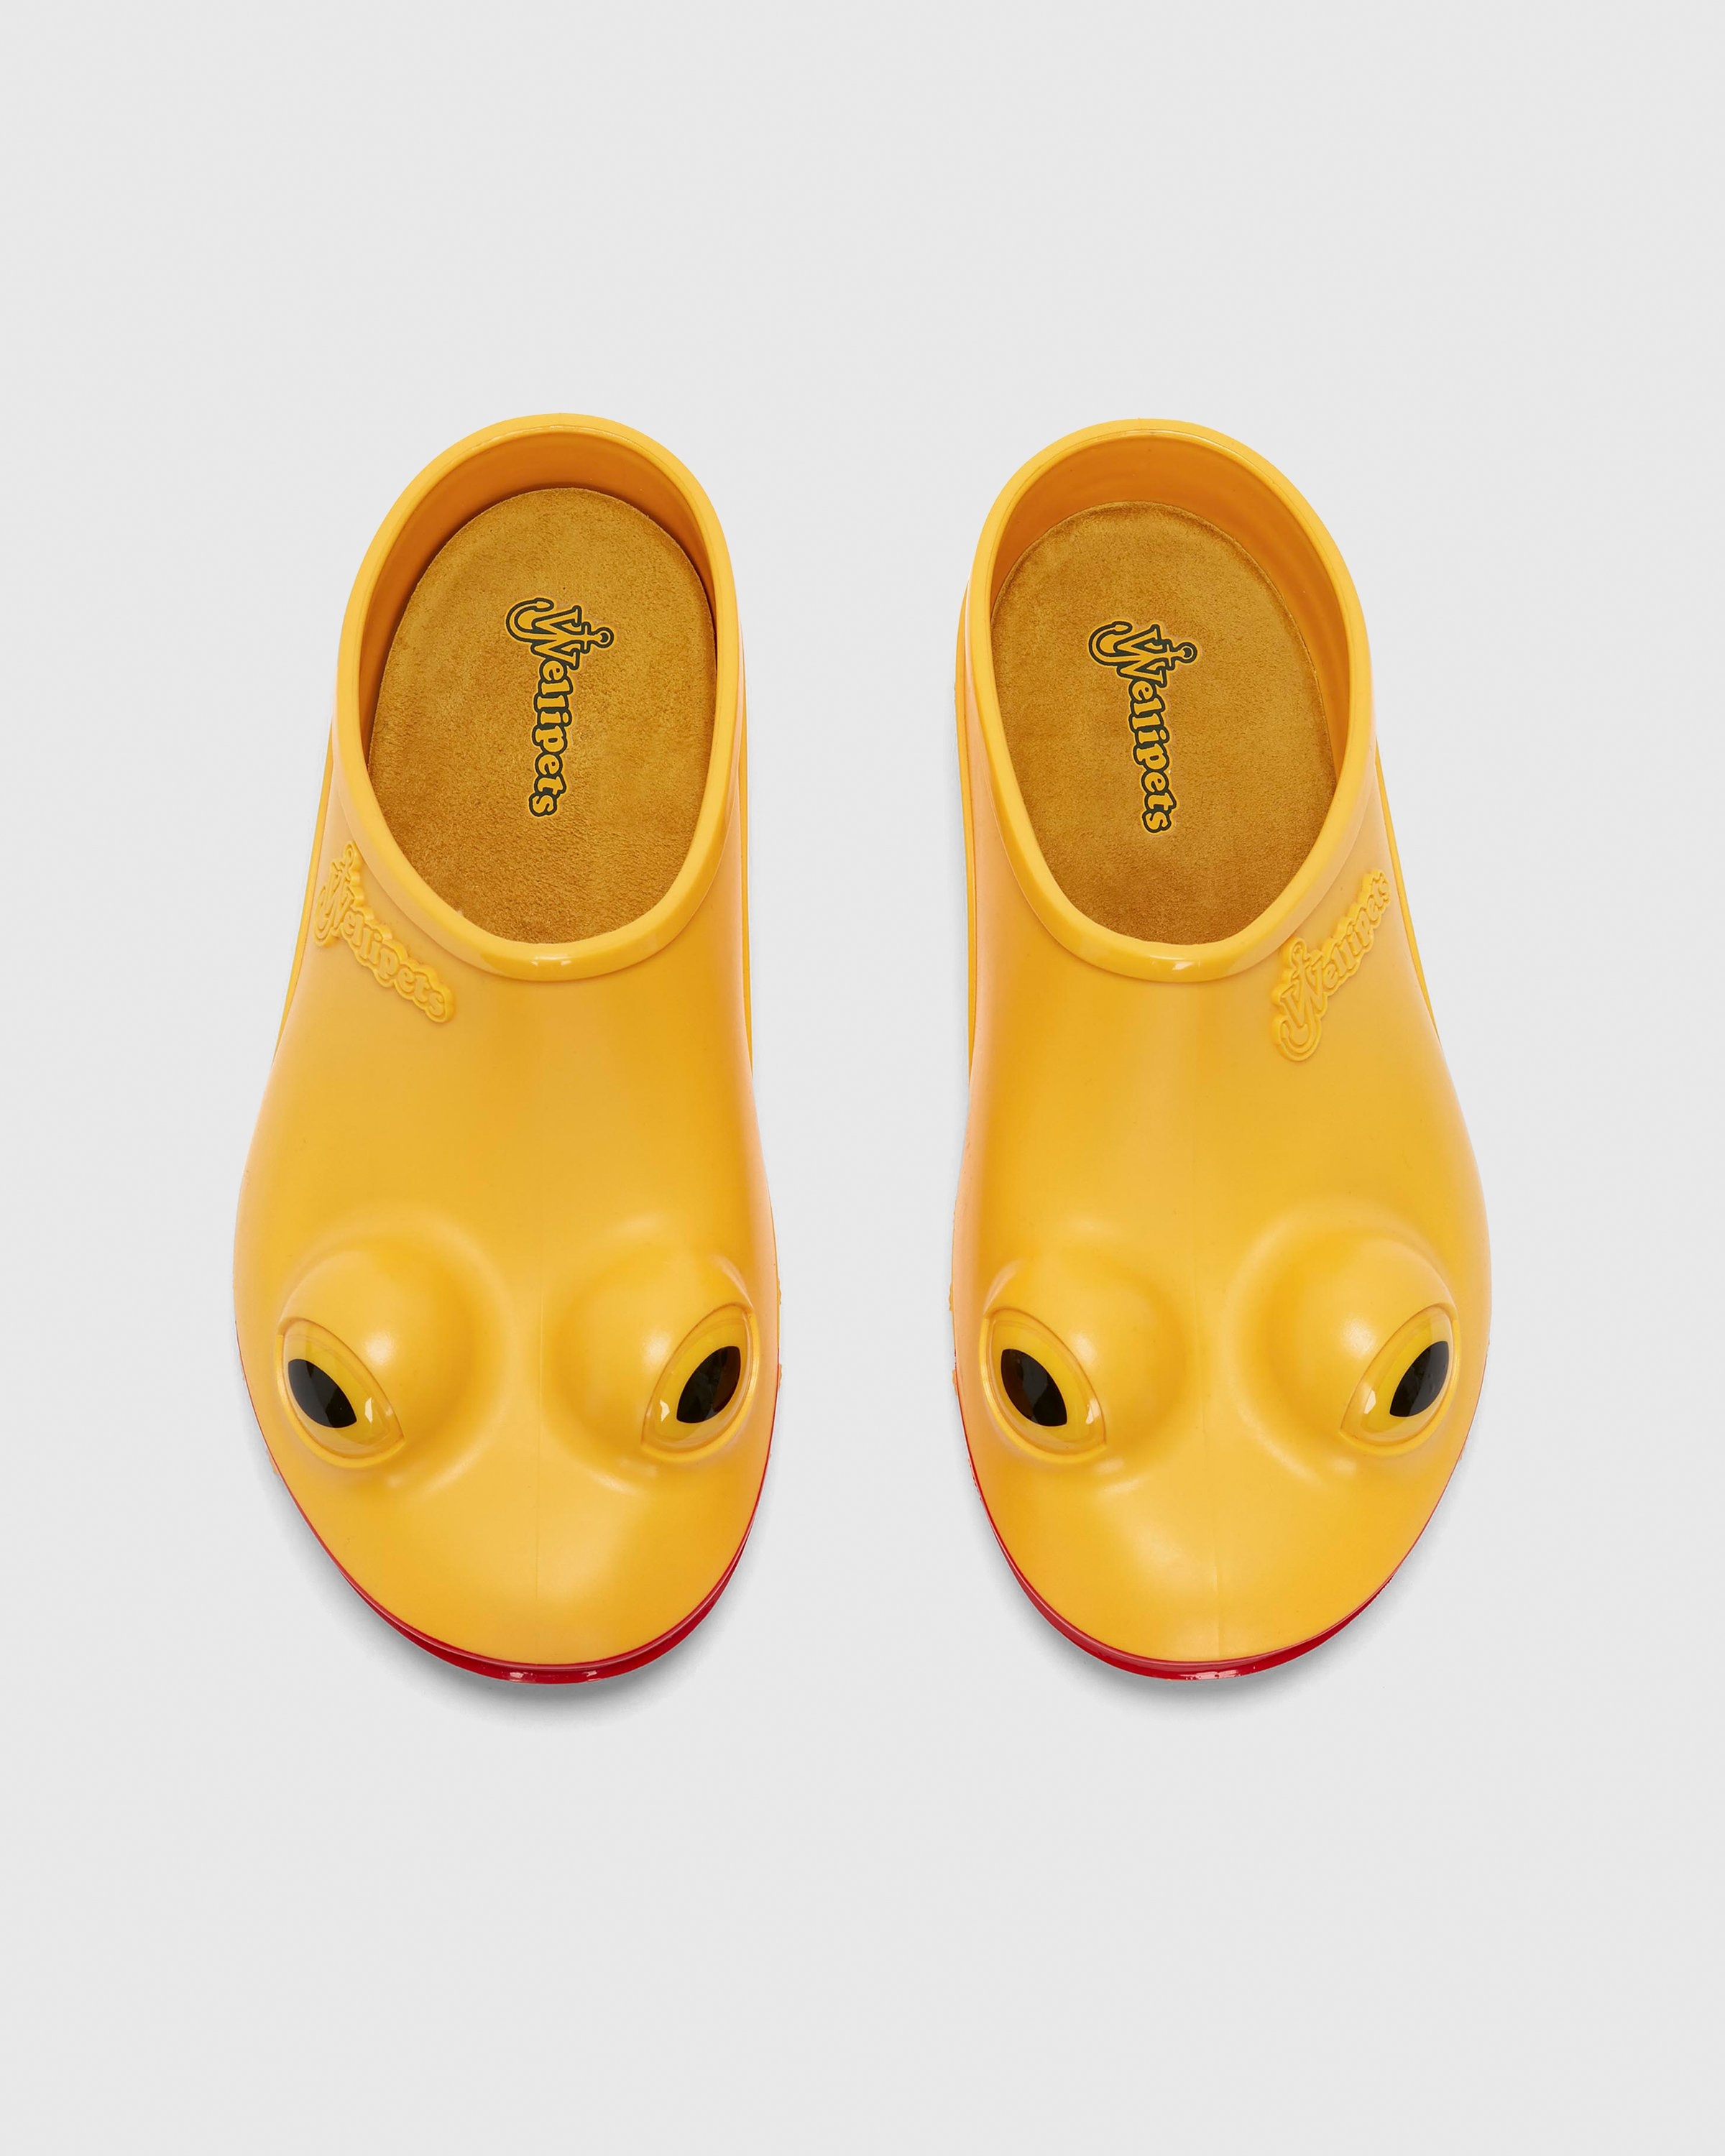 J.W. Anderson x Wellipets – Frog Loafer Yellow | Highsnobiety Shop